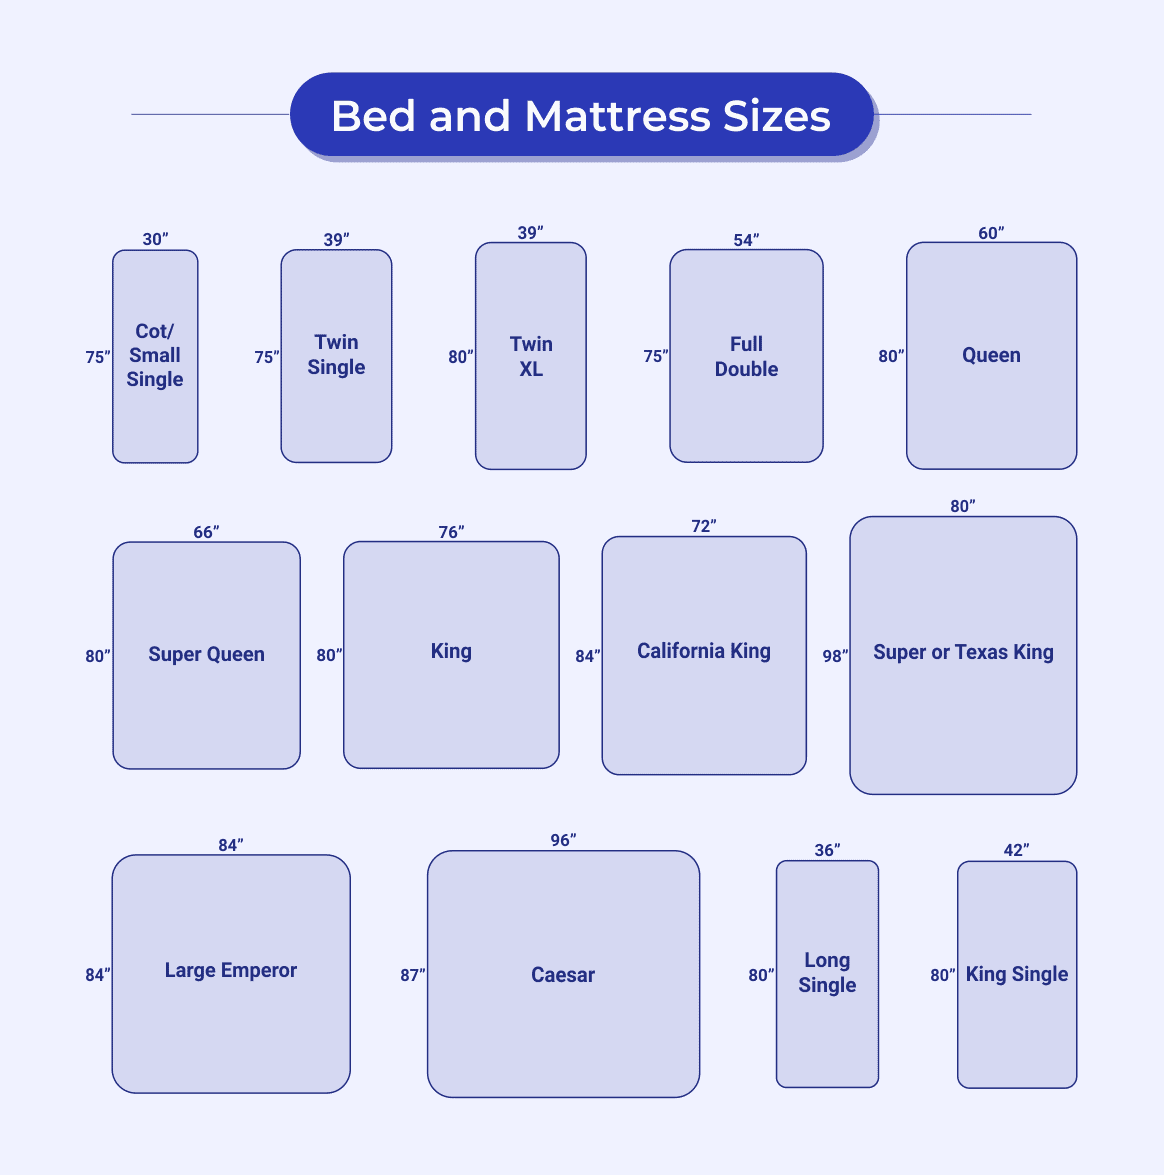 Bed Sizes